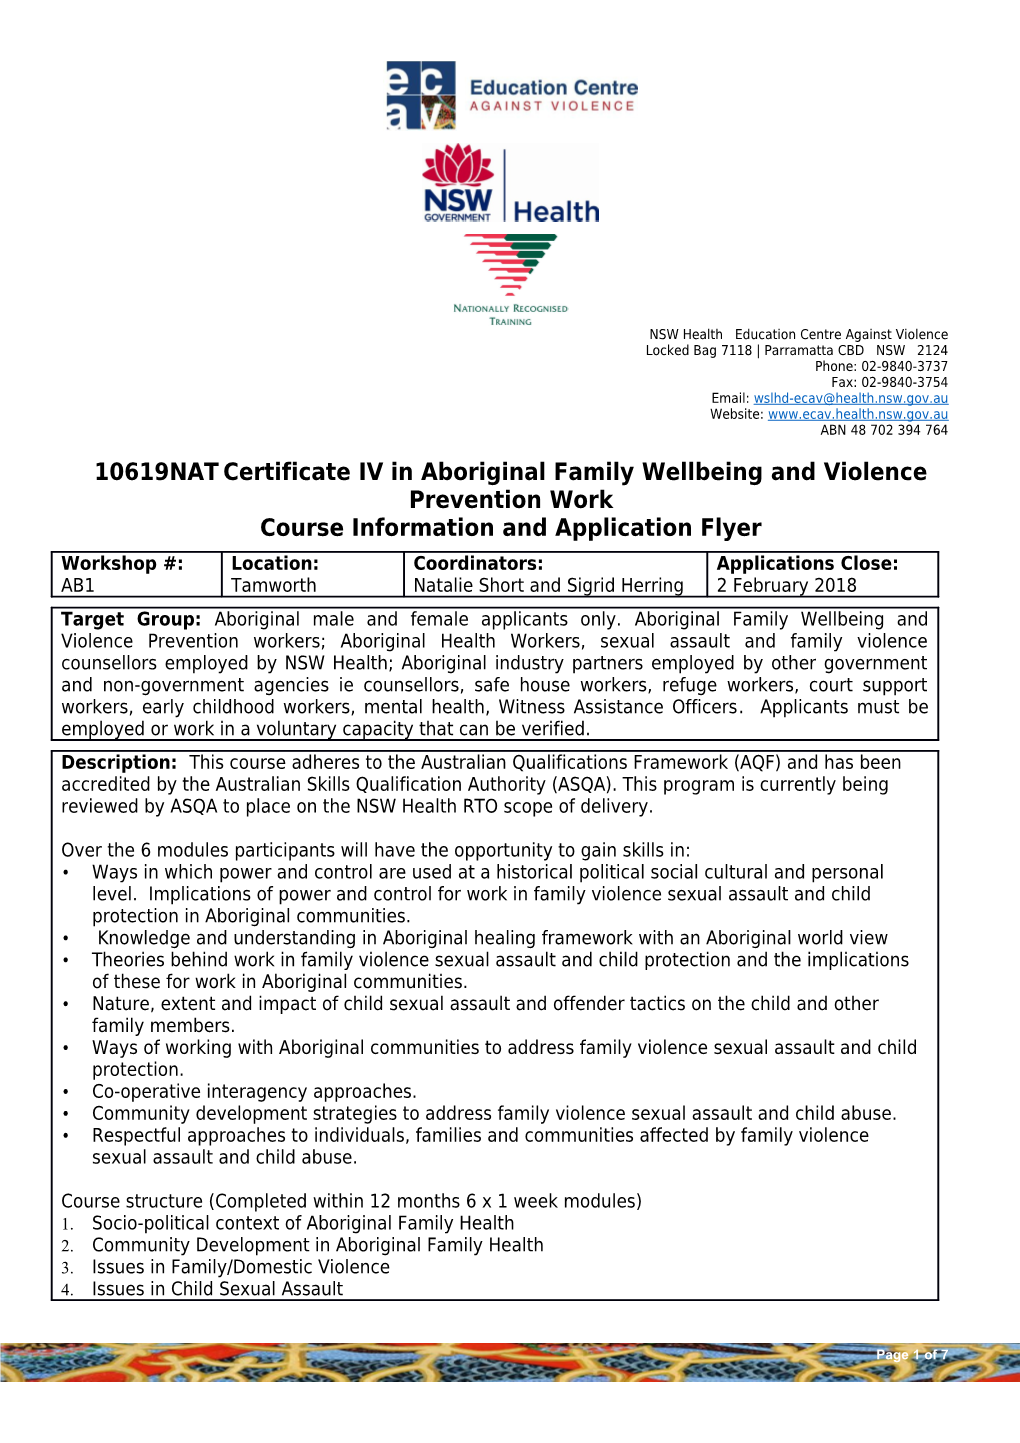 10619Natcertificate IV in Aboriginal Family Wellbeing and Violence Prevention Work